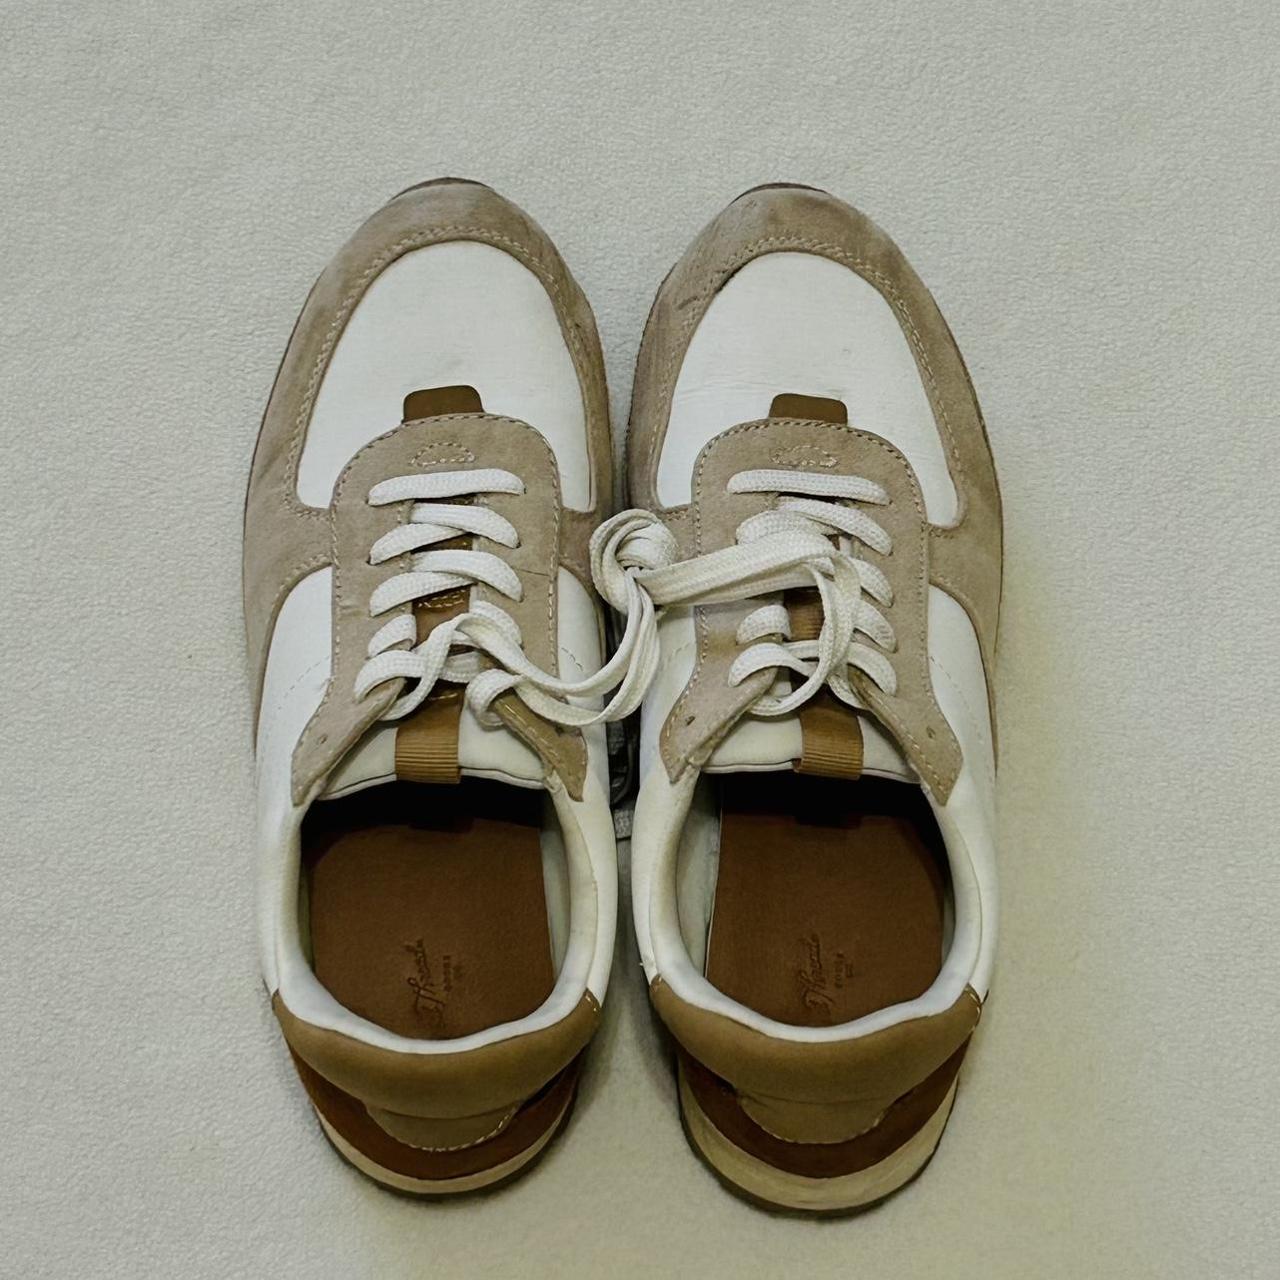 Universal Thread Women's White and Tan Trainers